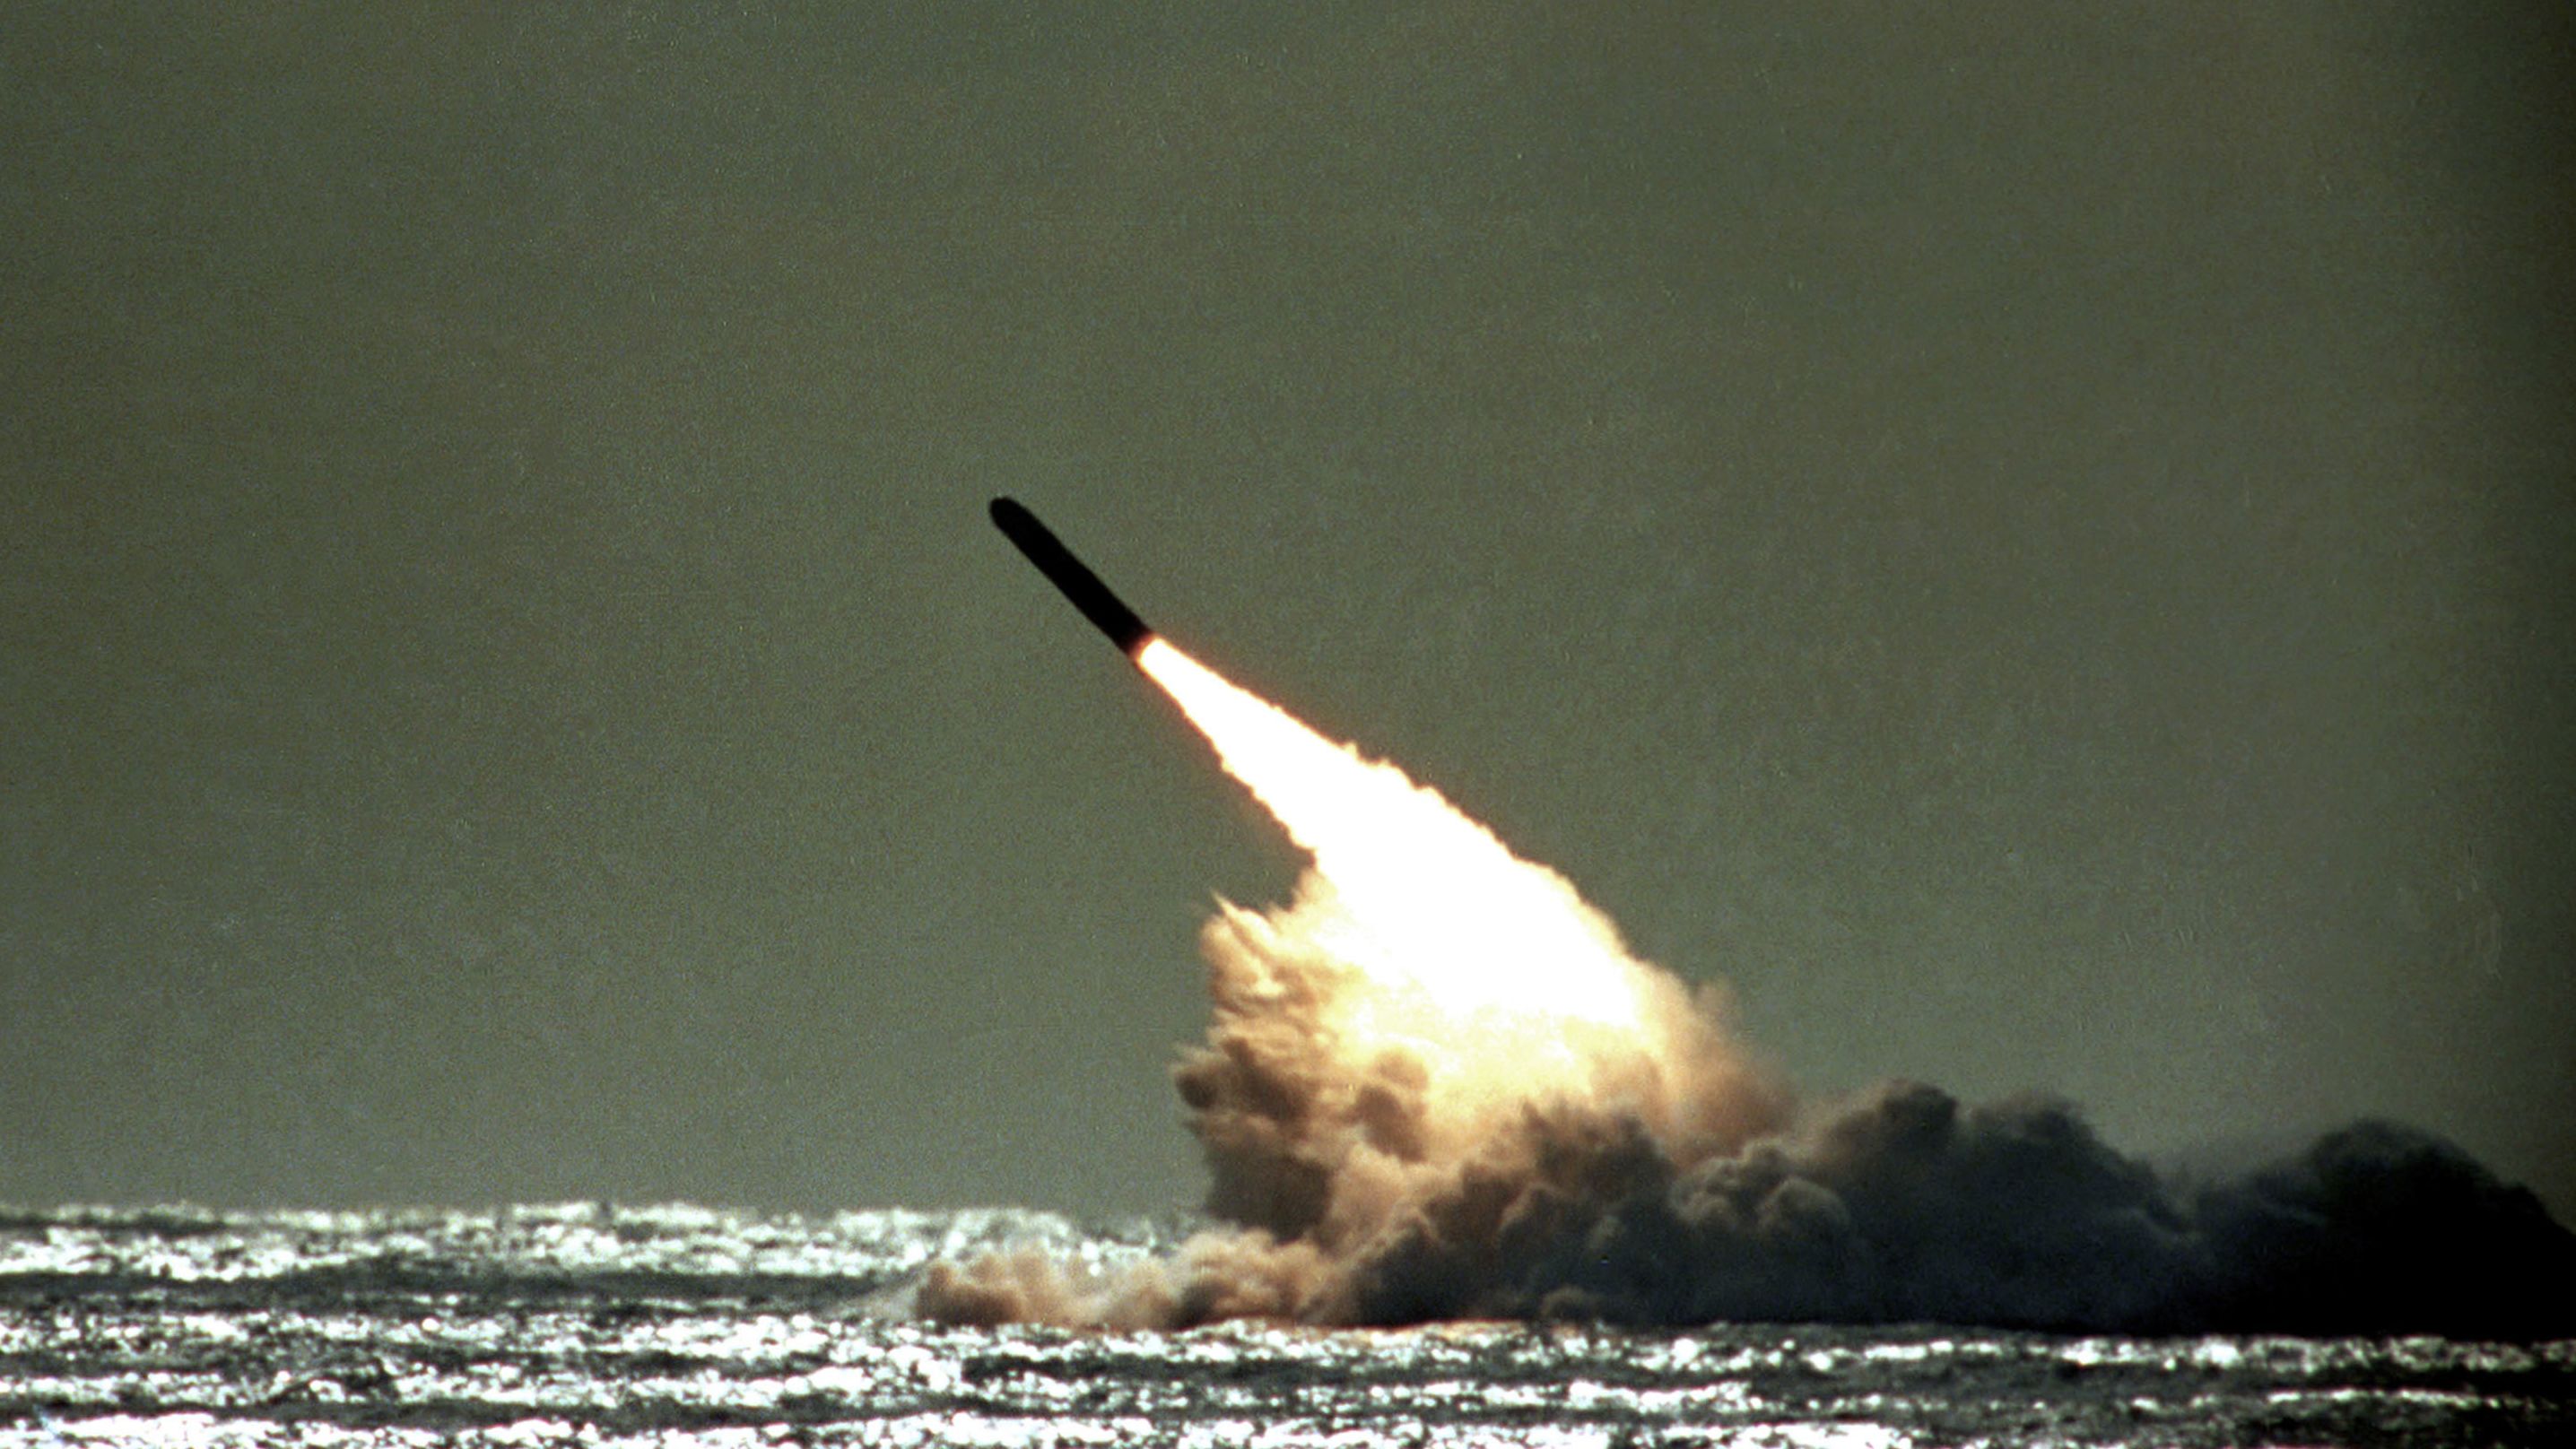 A Trident missile is launched by the US navy during a test in 1989.